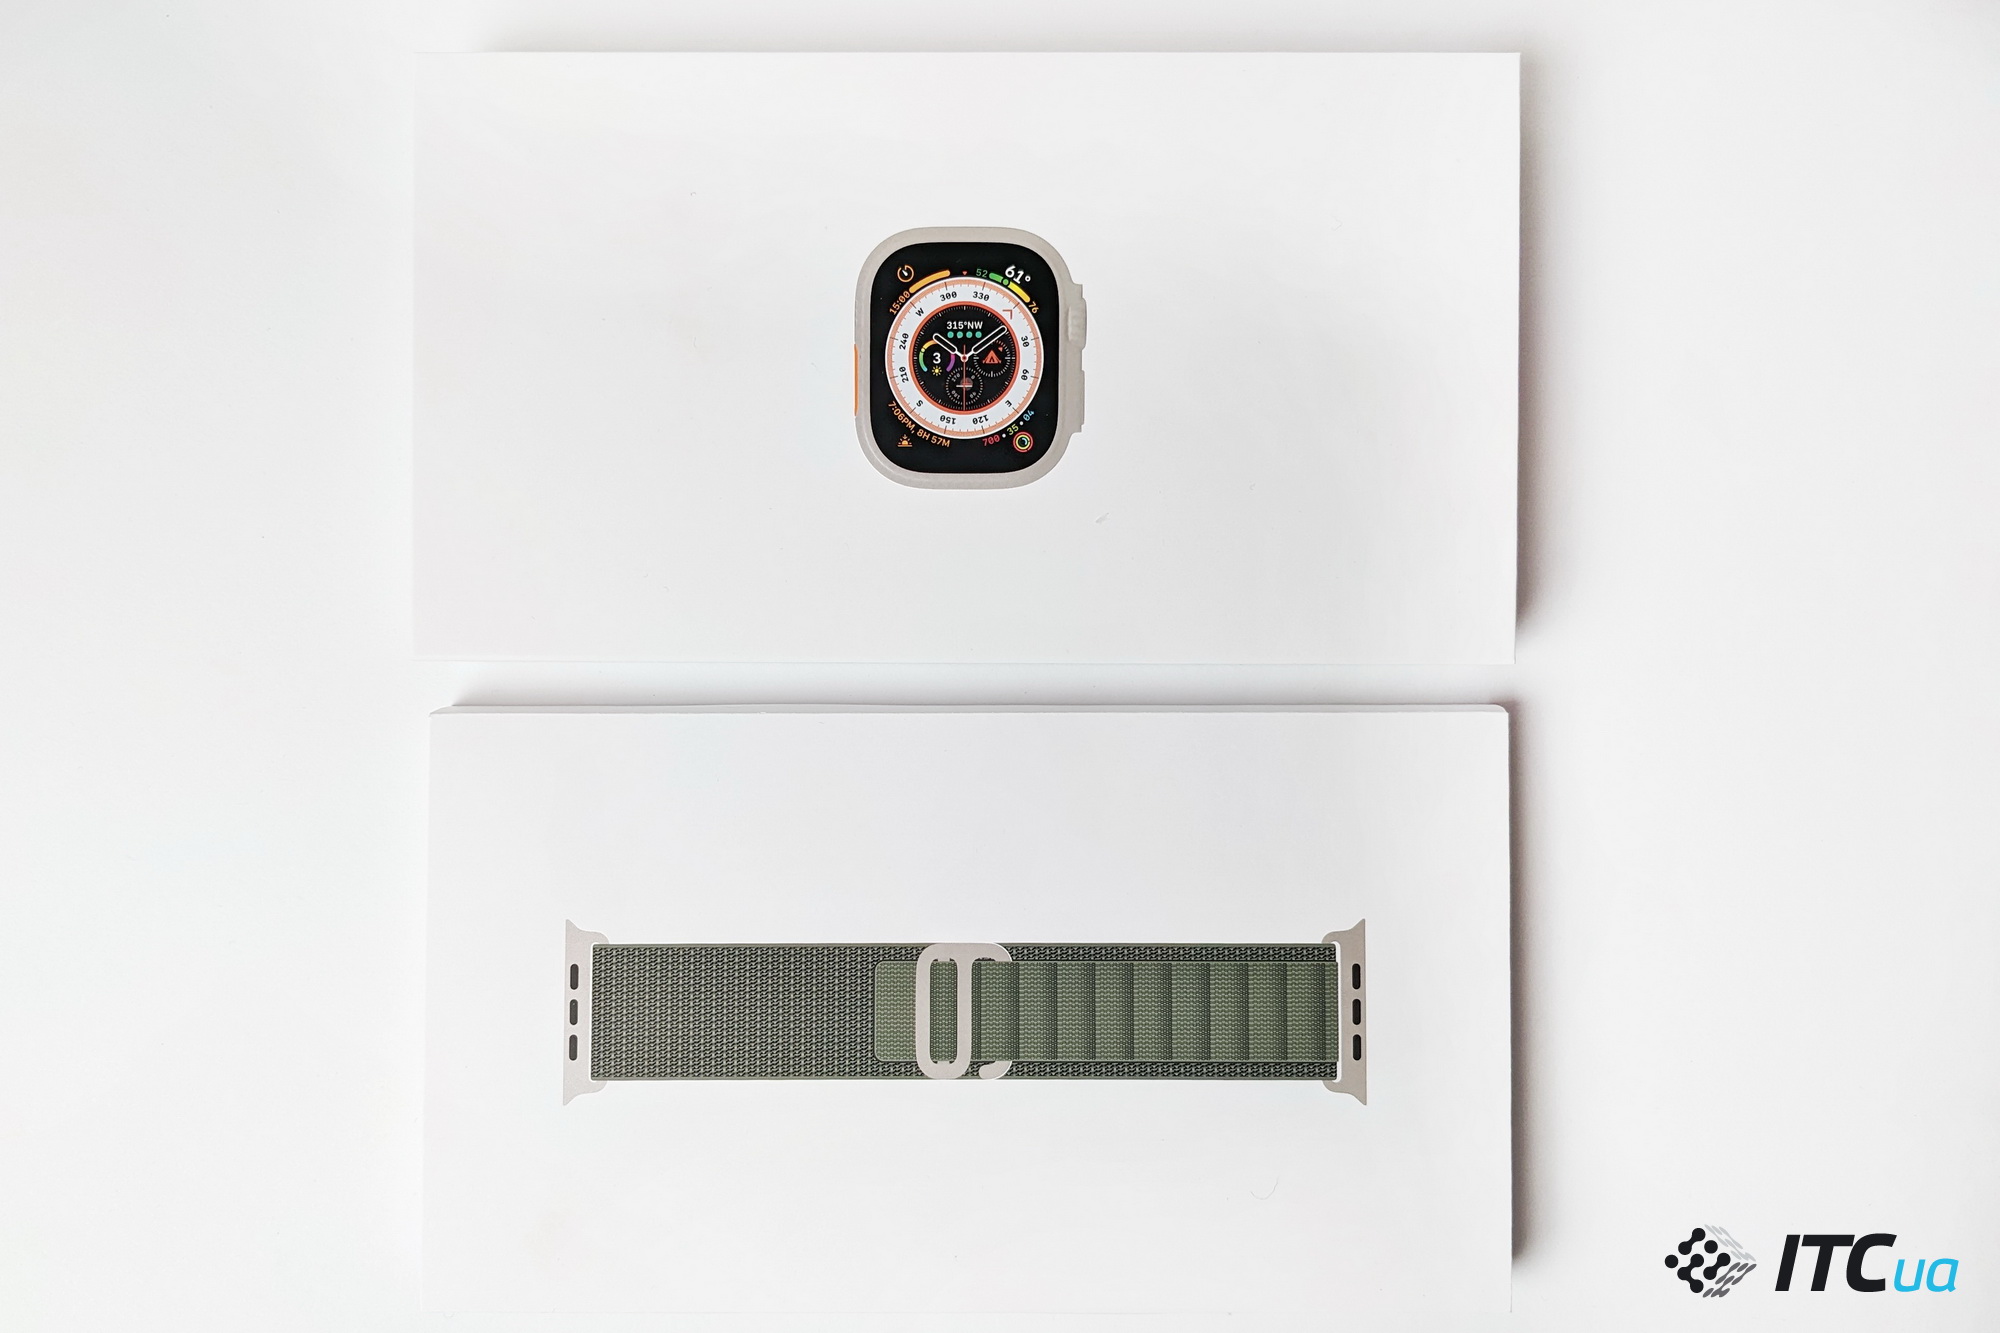 Apple Watch Ultra review: new design, enhanced functionality and indestructible case